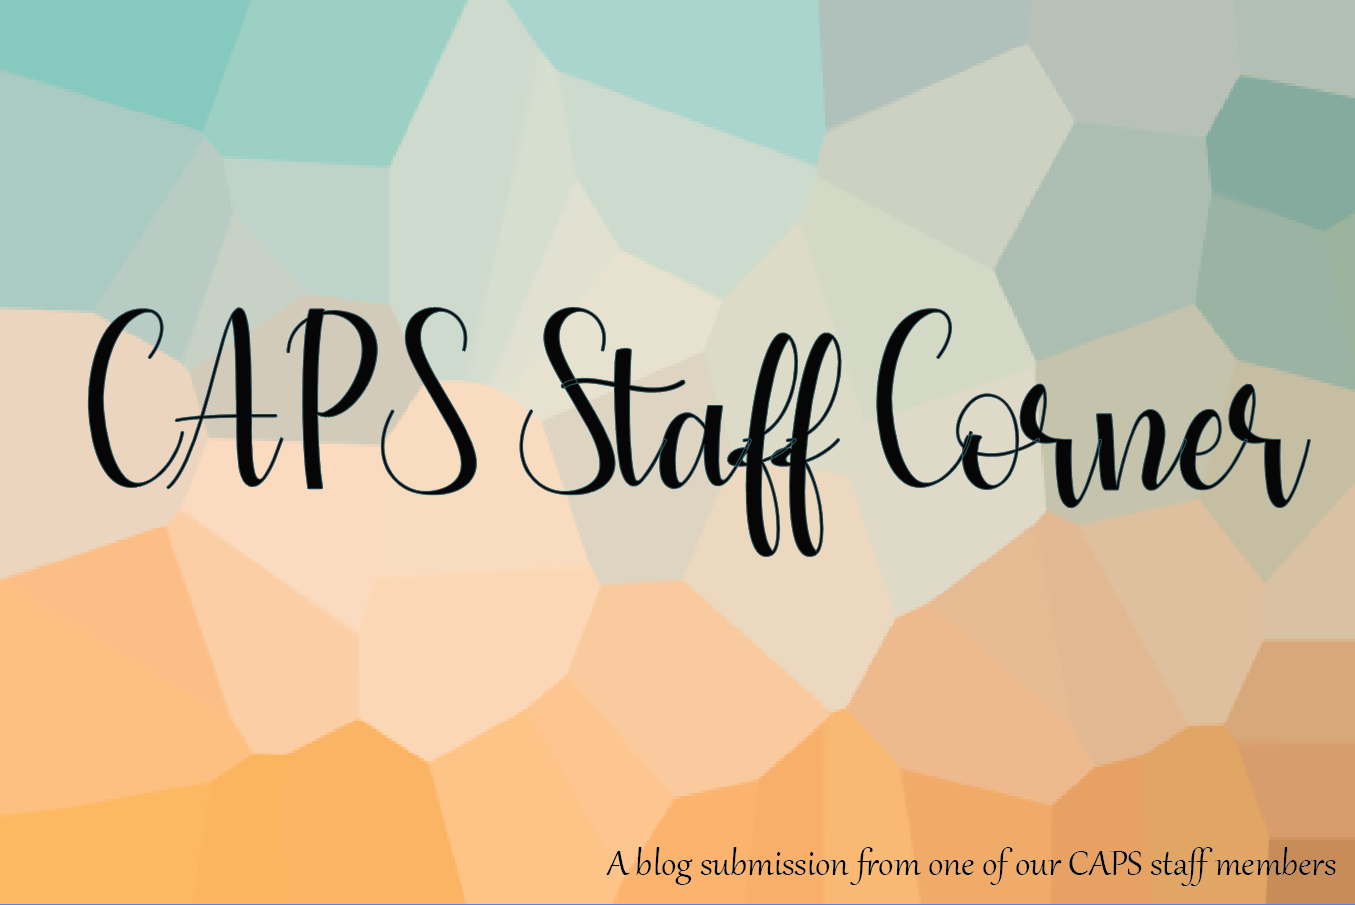 CAPS Staff Corner - blog submission from a staff member